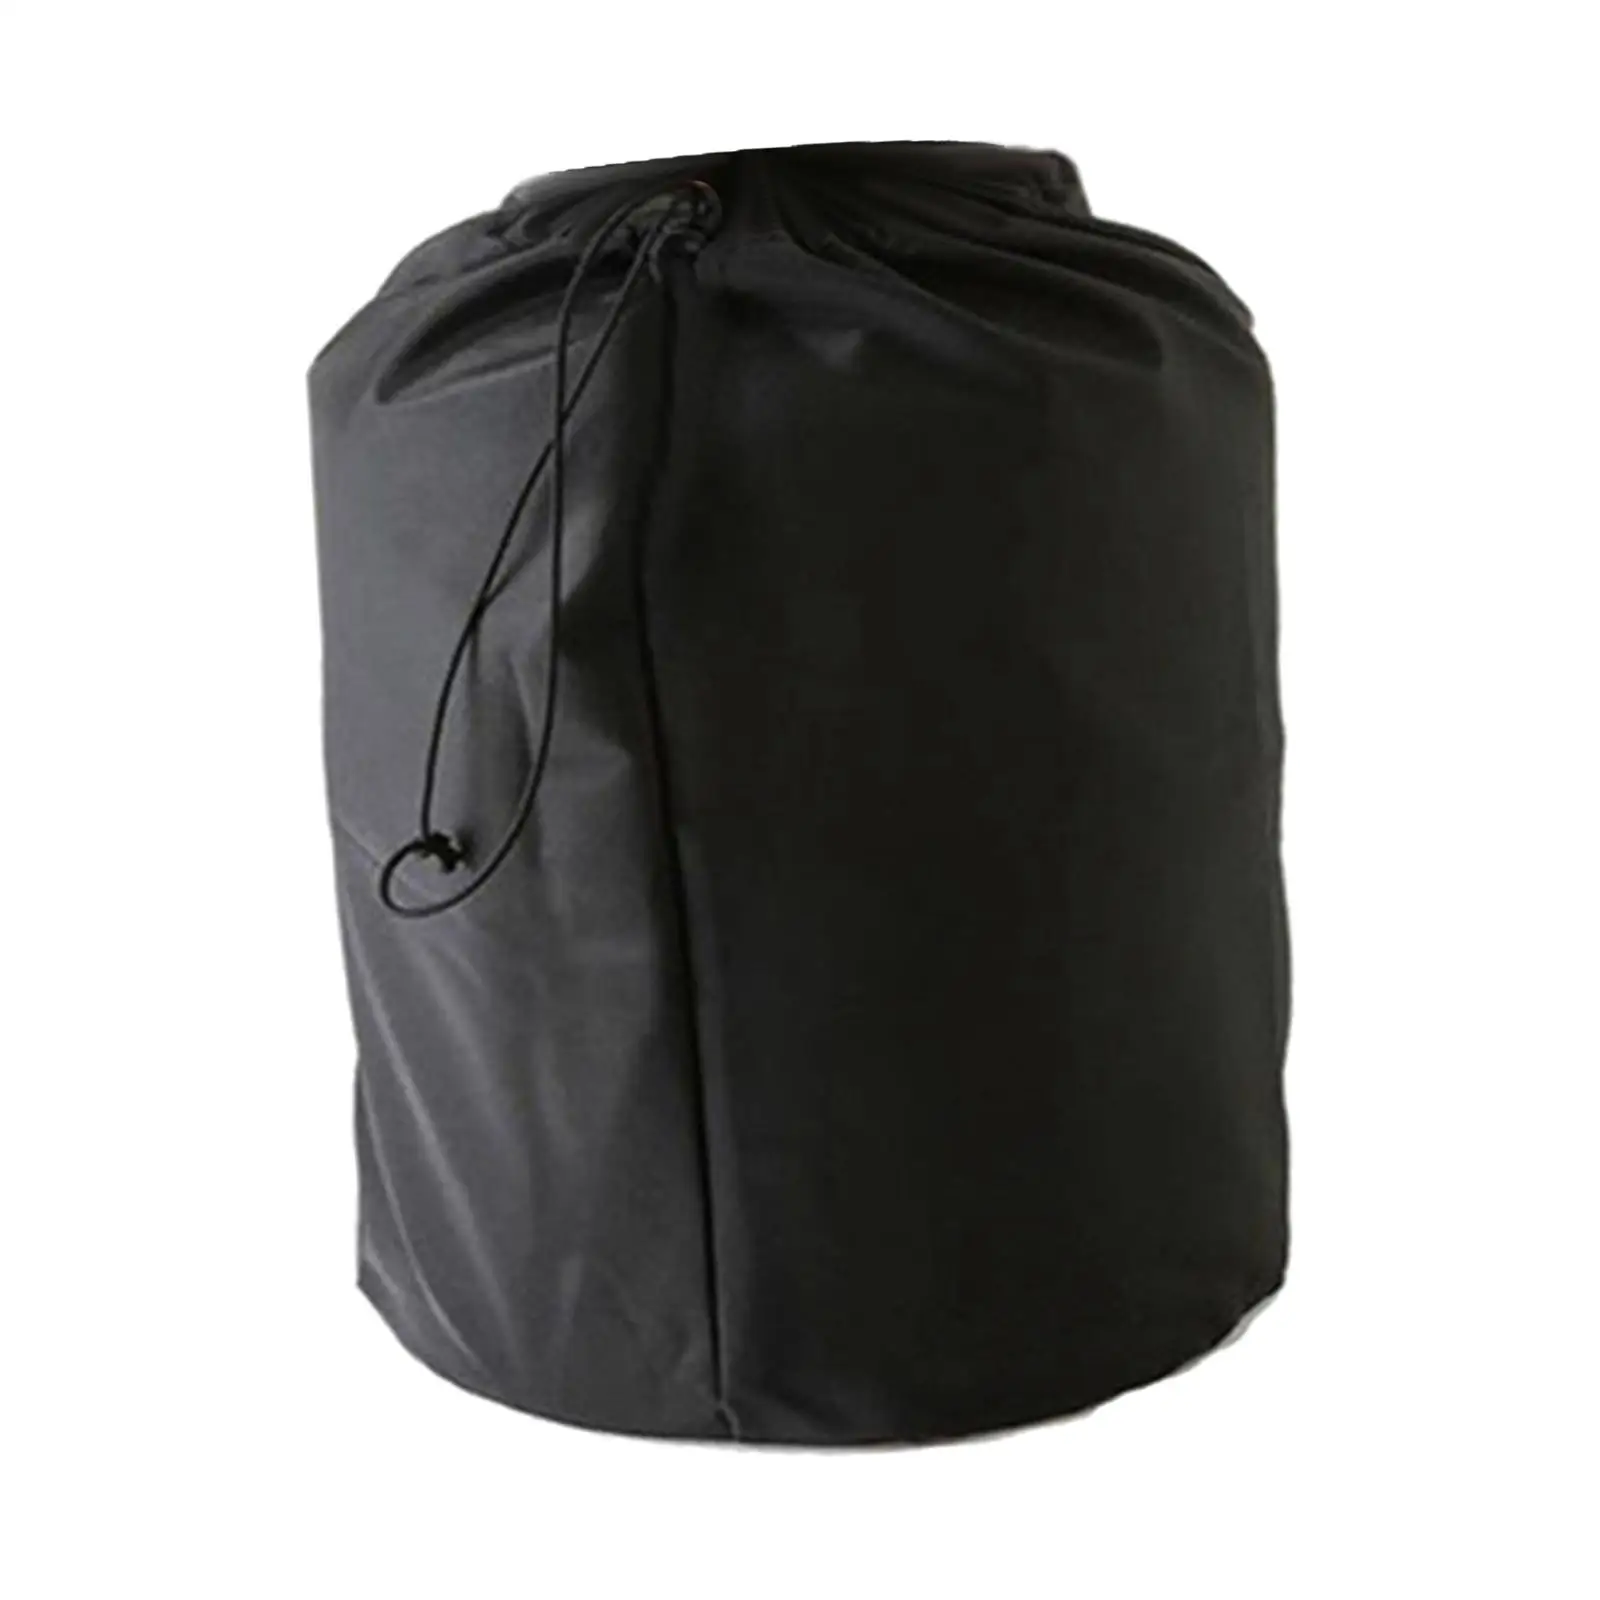 Gas Tank Bags Can Protector Portable Dustproof Cookware Tool for Travel Hiking Gardening Backpacking Camping Enthusiasts